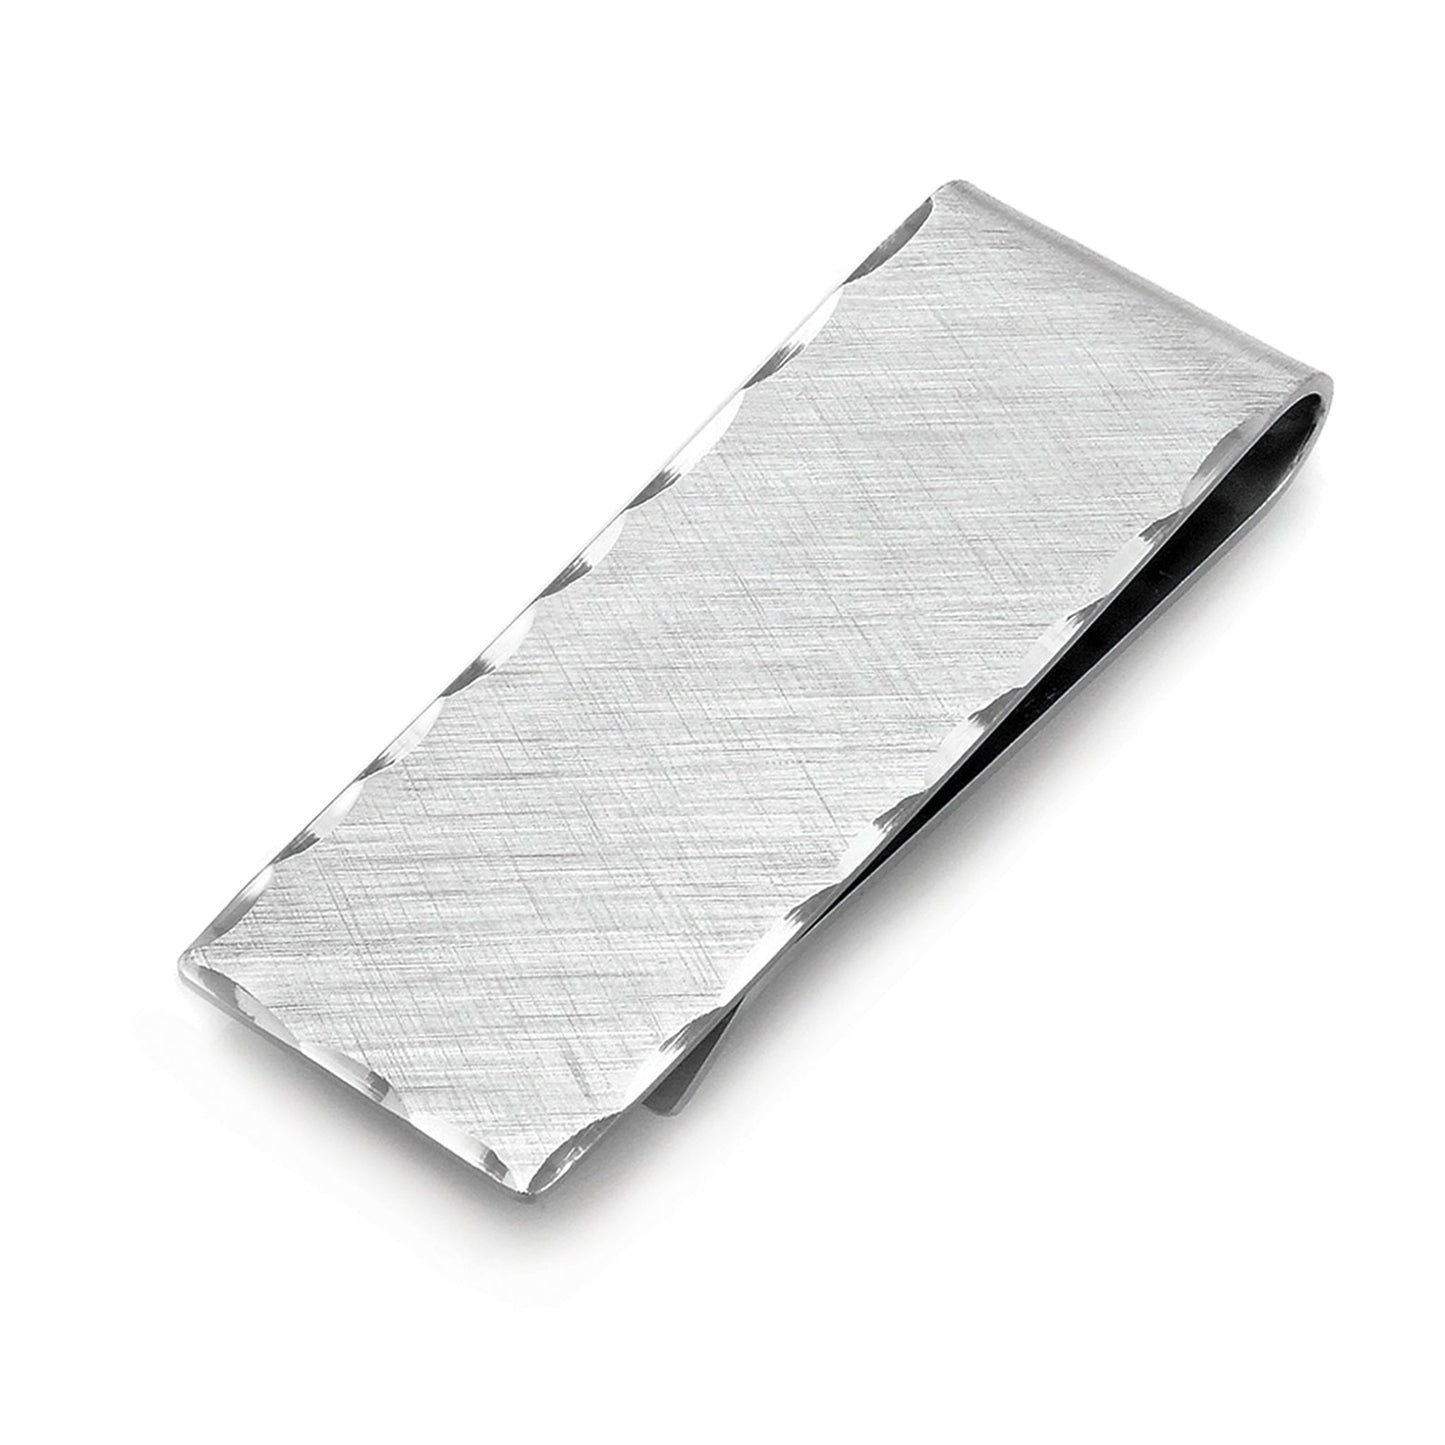 A 3 and 4" sterling silver florentine engraved money clip displayed on a neutral white background.